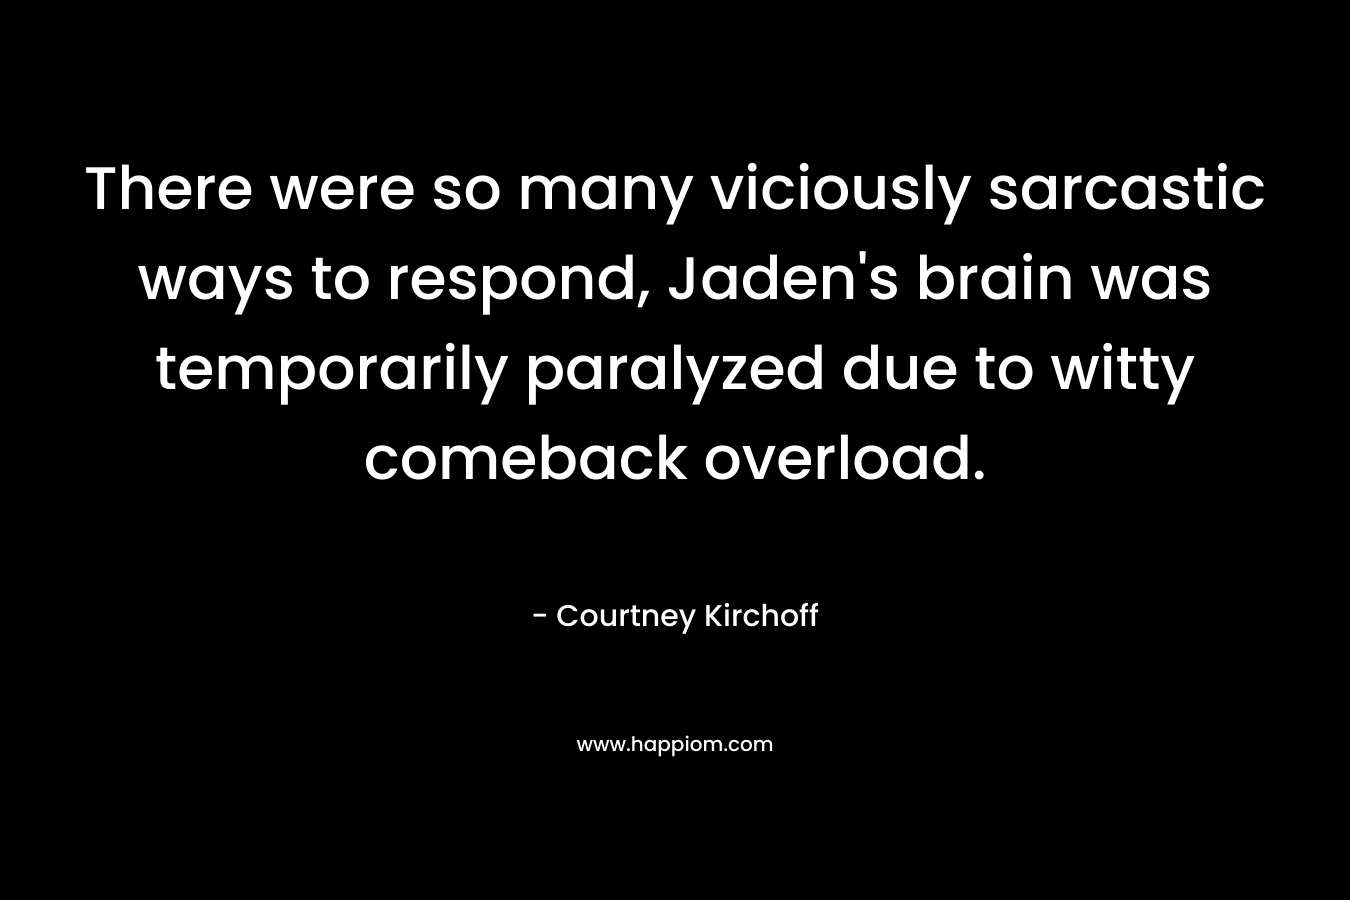 There were so many viciously sarcastic ways to respond, Jaden’s brain was temporarily paralyzed due to witty comeback overload. – Courtney Kirchoff